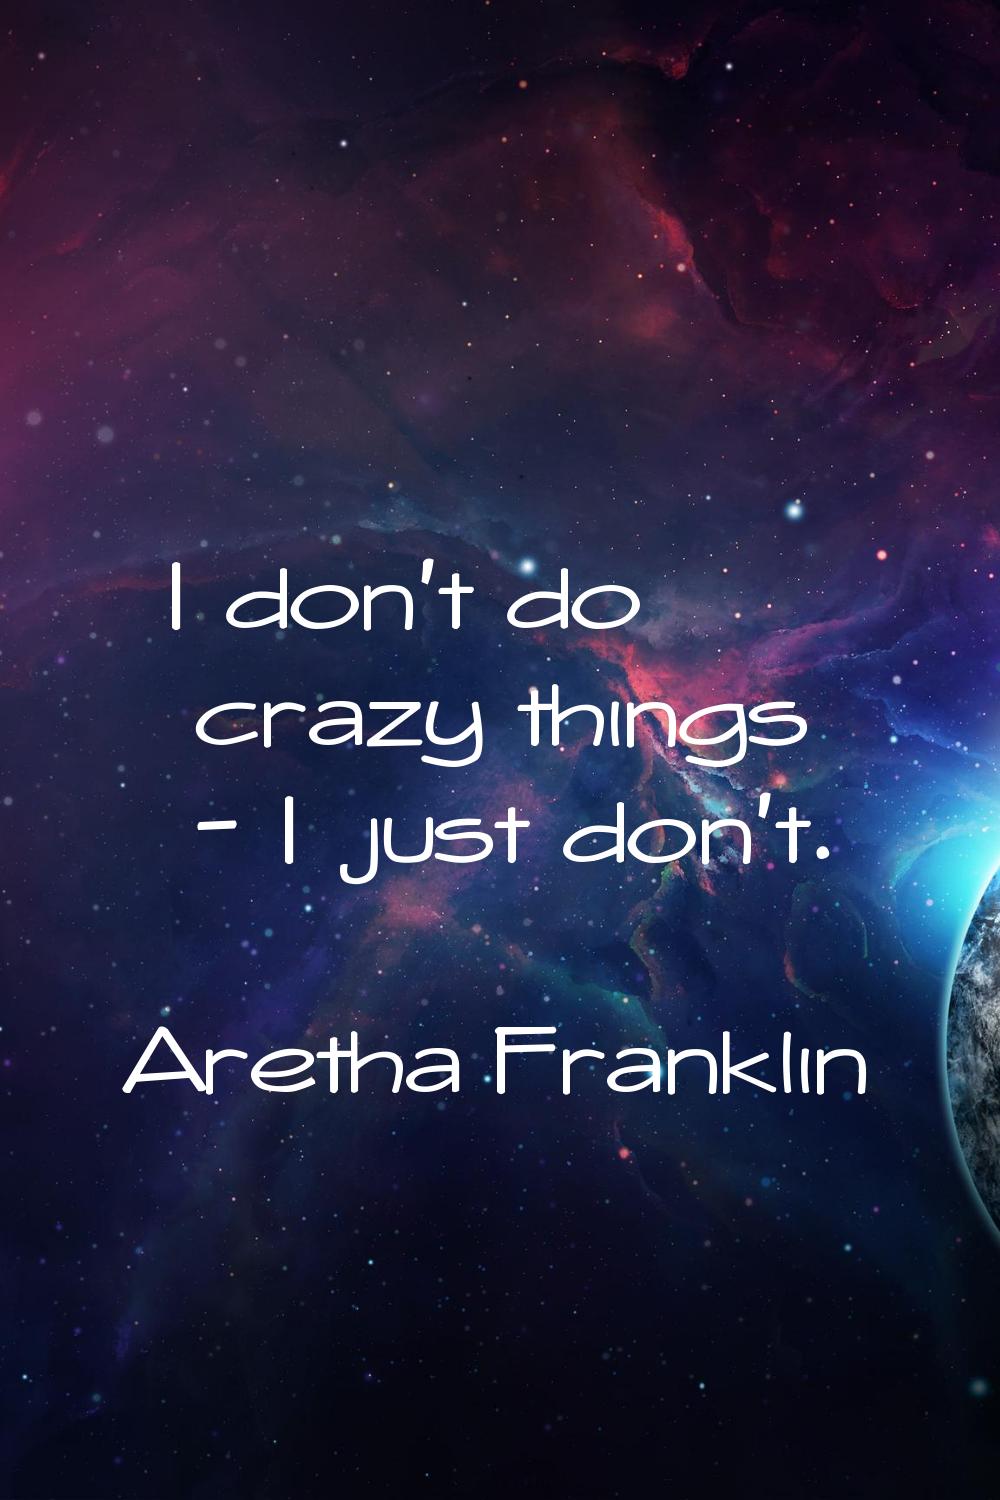 I don't do crazy things - I just don't.